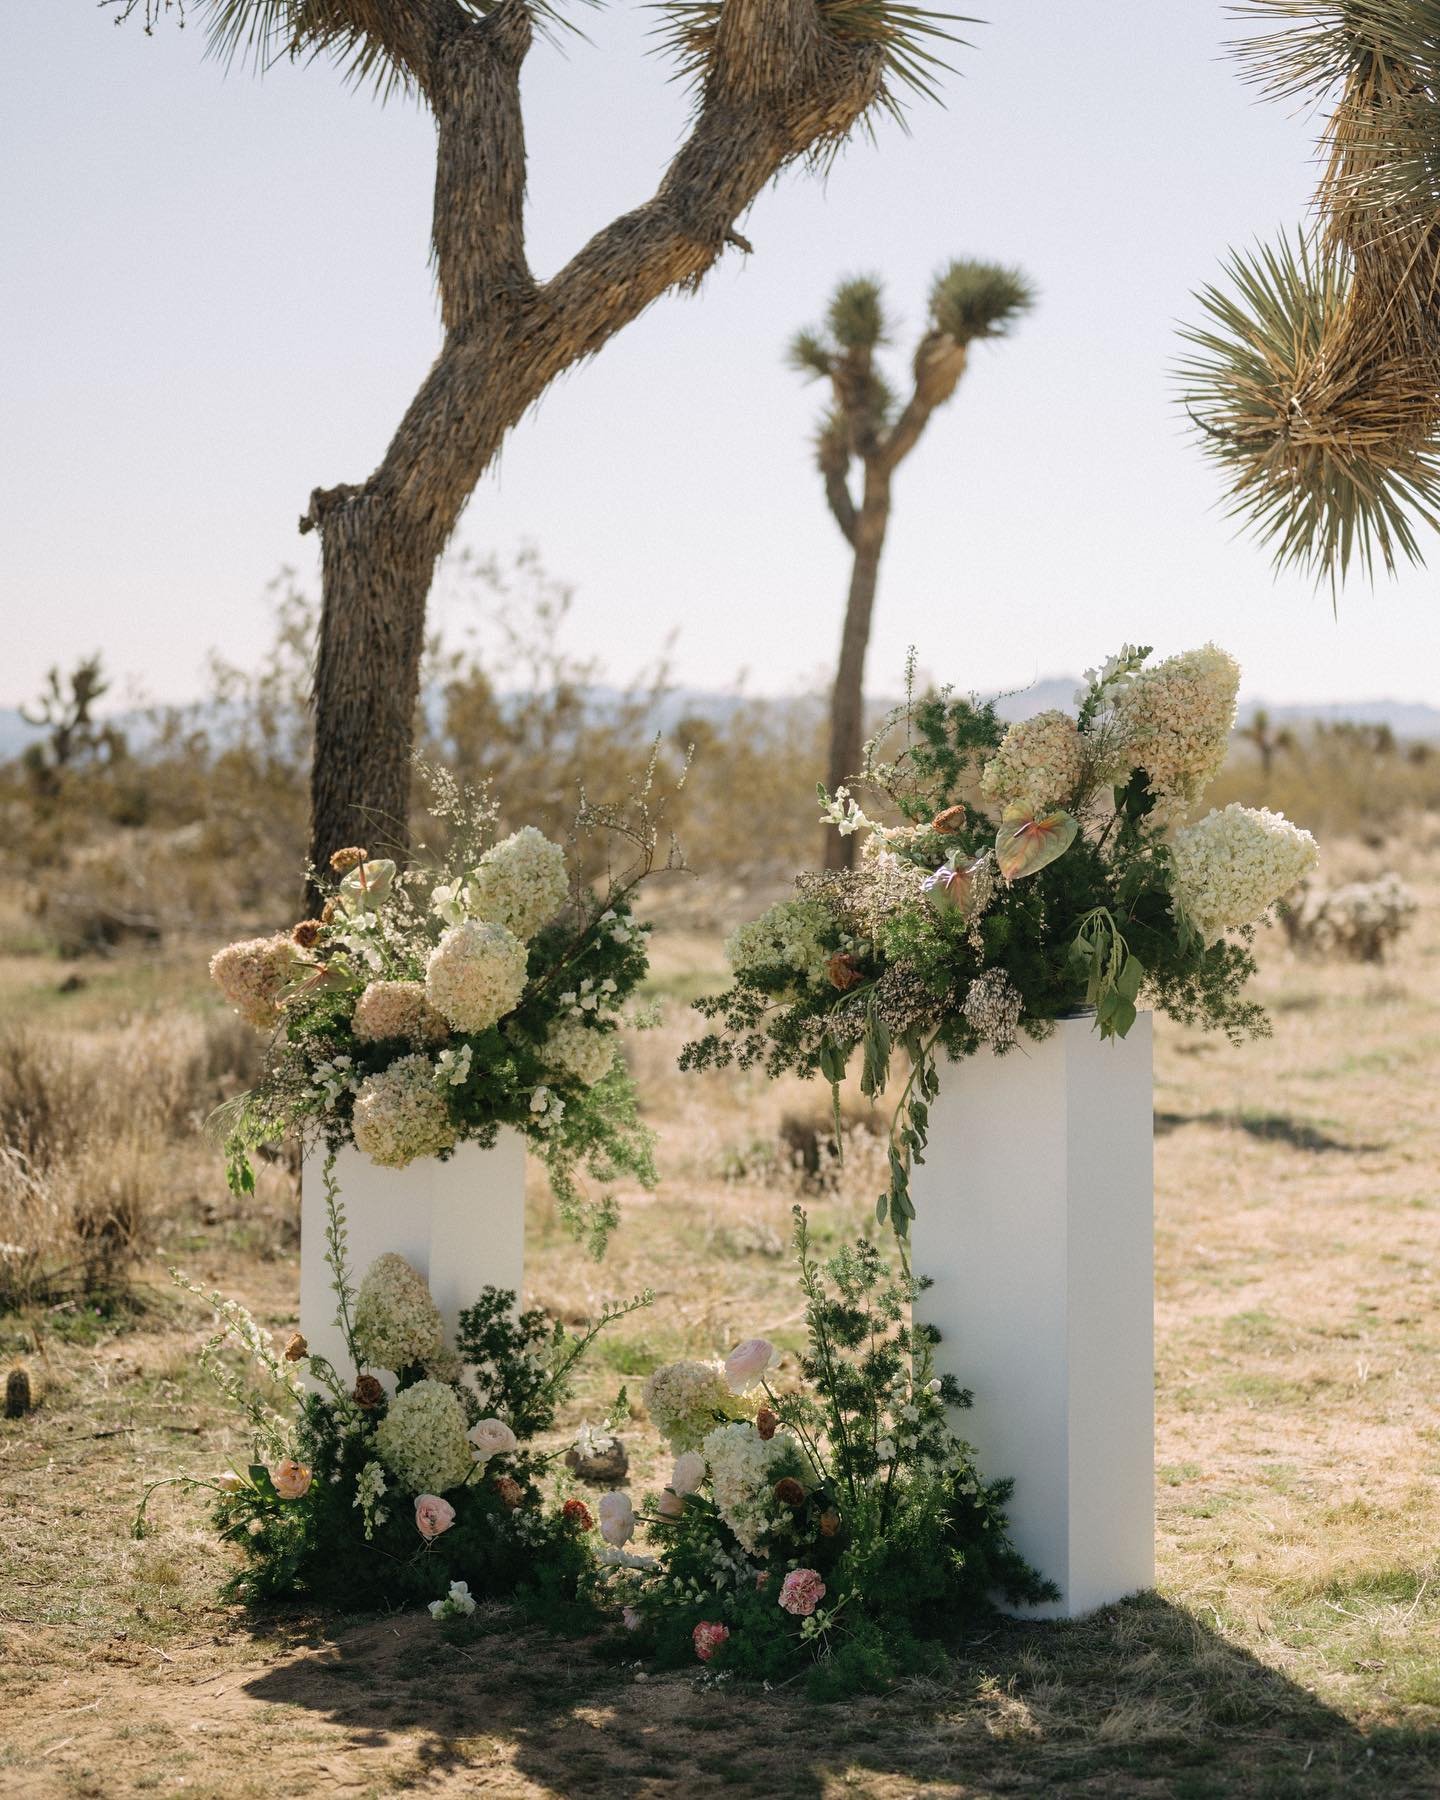 Nothing beats details at the desert! **manifesting being back there soon 
.
.
. 
Host/Planning &amp; Design: @wildeandsageco
Florals: @honeybloomflorals
Signage: @blushwoodco
Stationery: @noteworthyco
Rentals: @brighteventrentals @wildeandsageco
Bar/